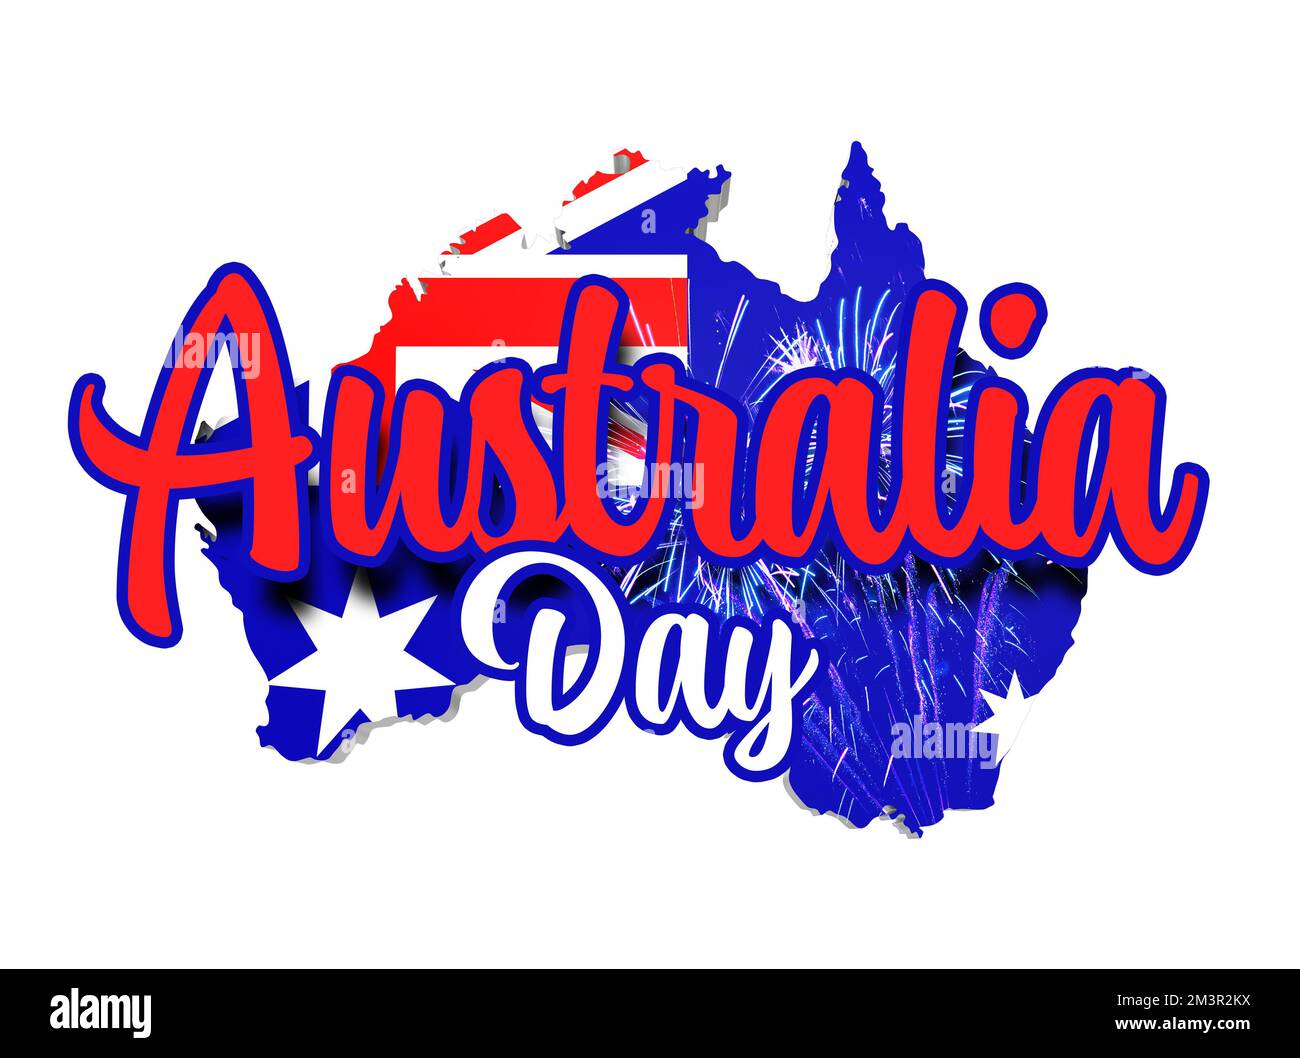 australia day - 26th january - white background - 3D rendering Stock Photo